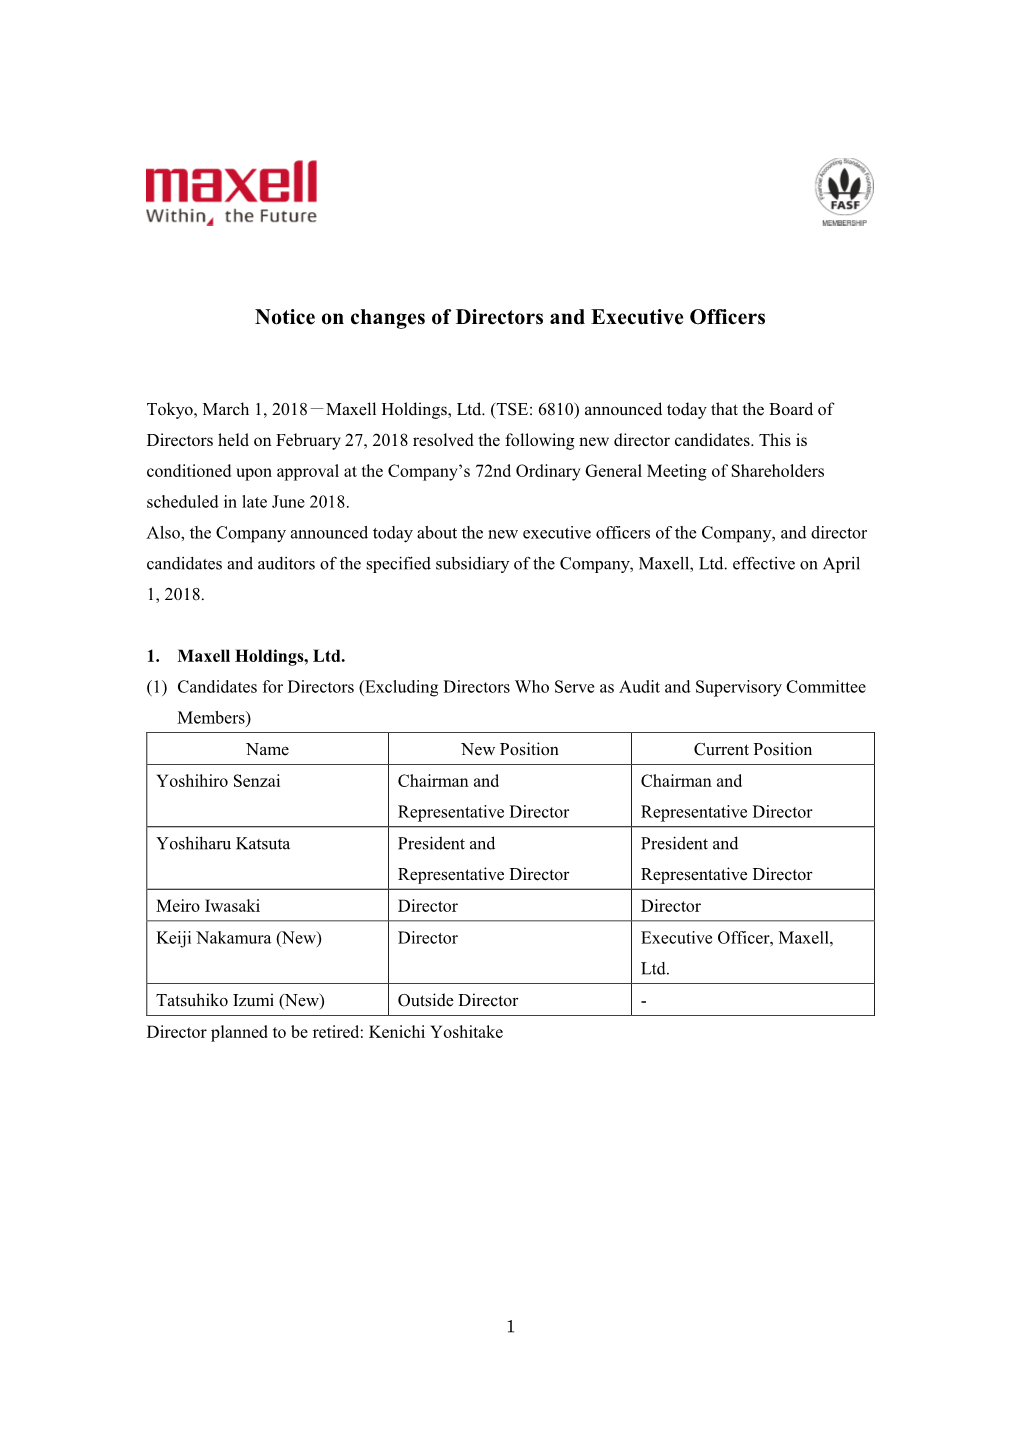 Notice on Changes of Directors and Executive Officers